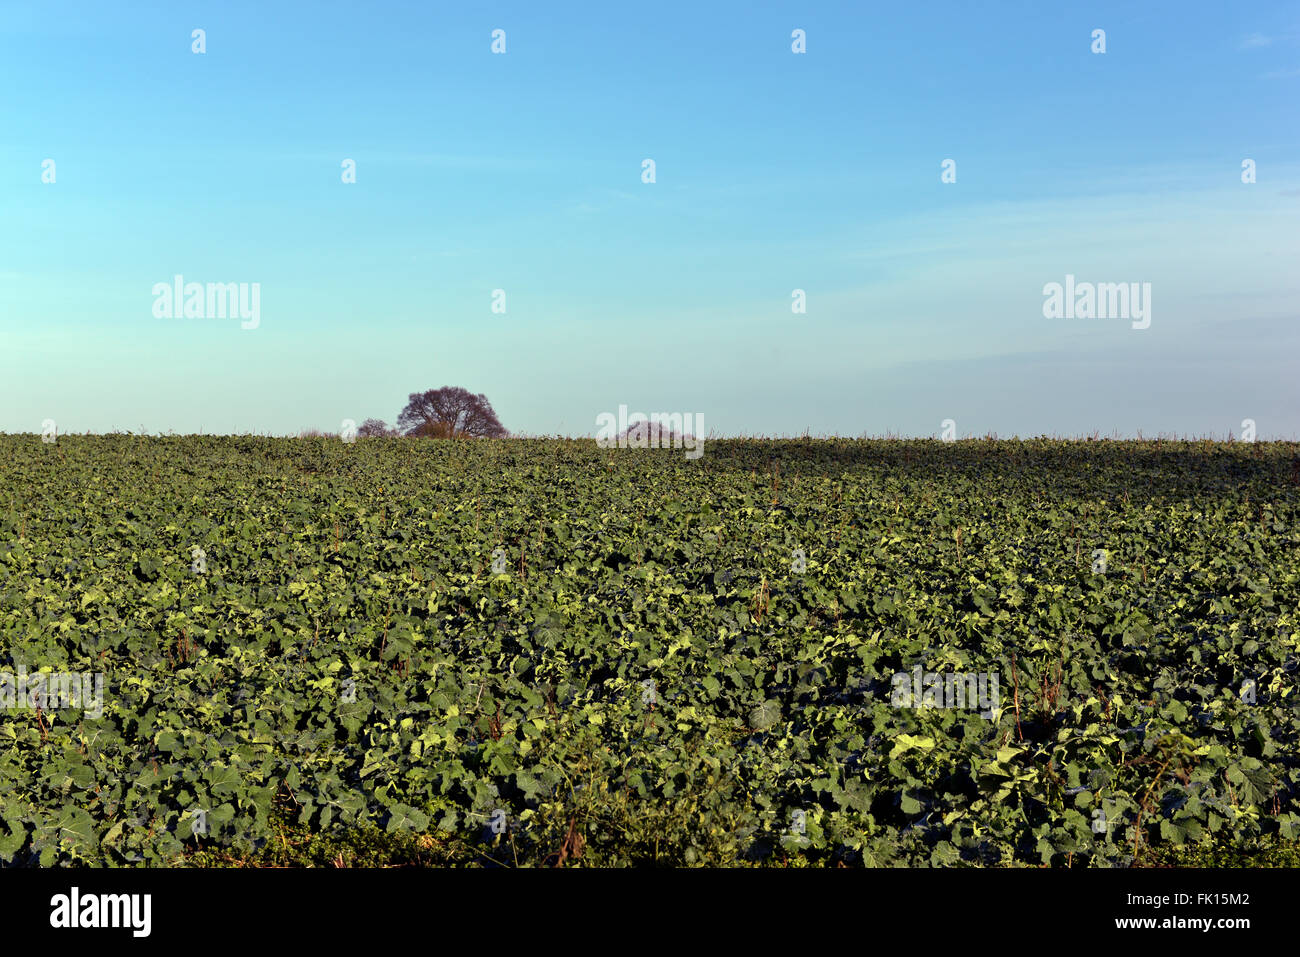 winter scene of Essex countryside with field of winter kale Stock Photo